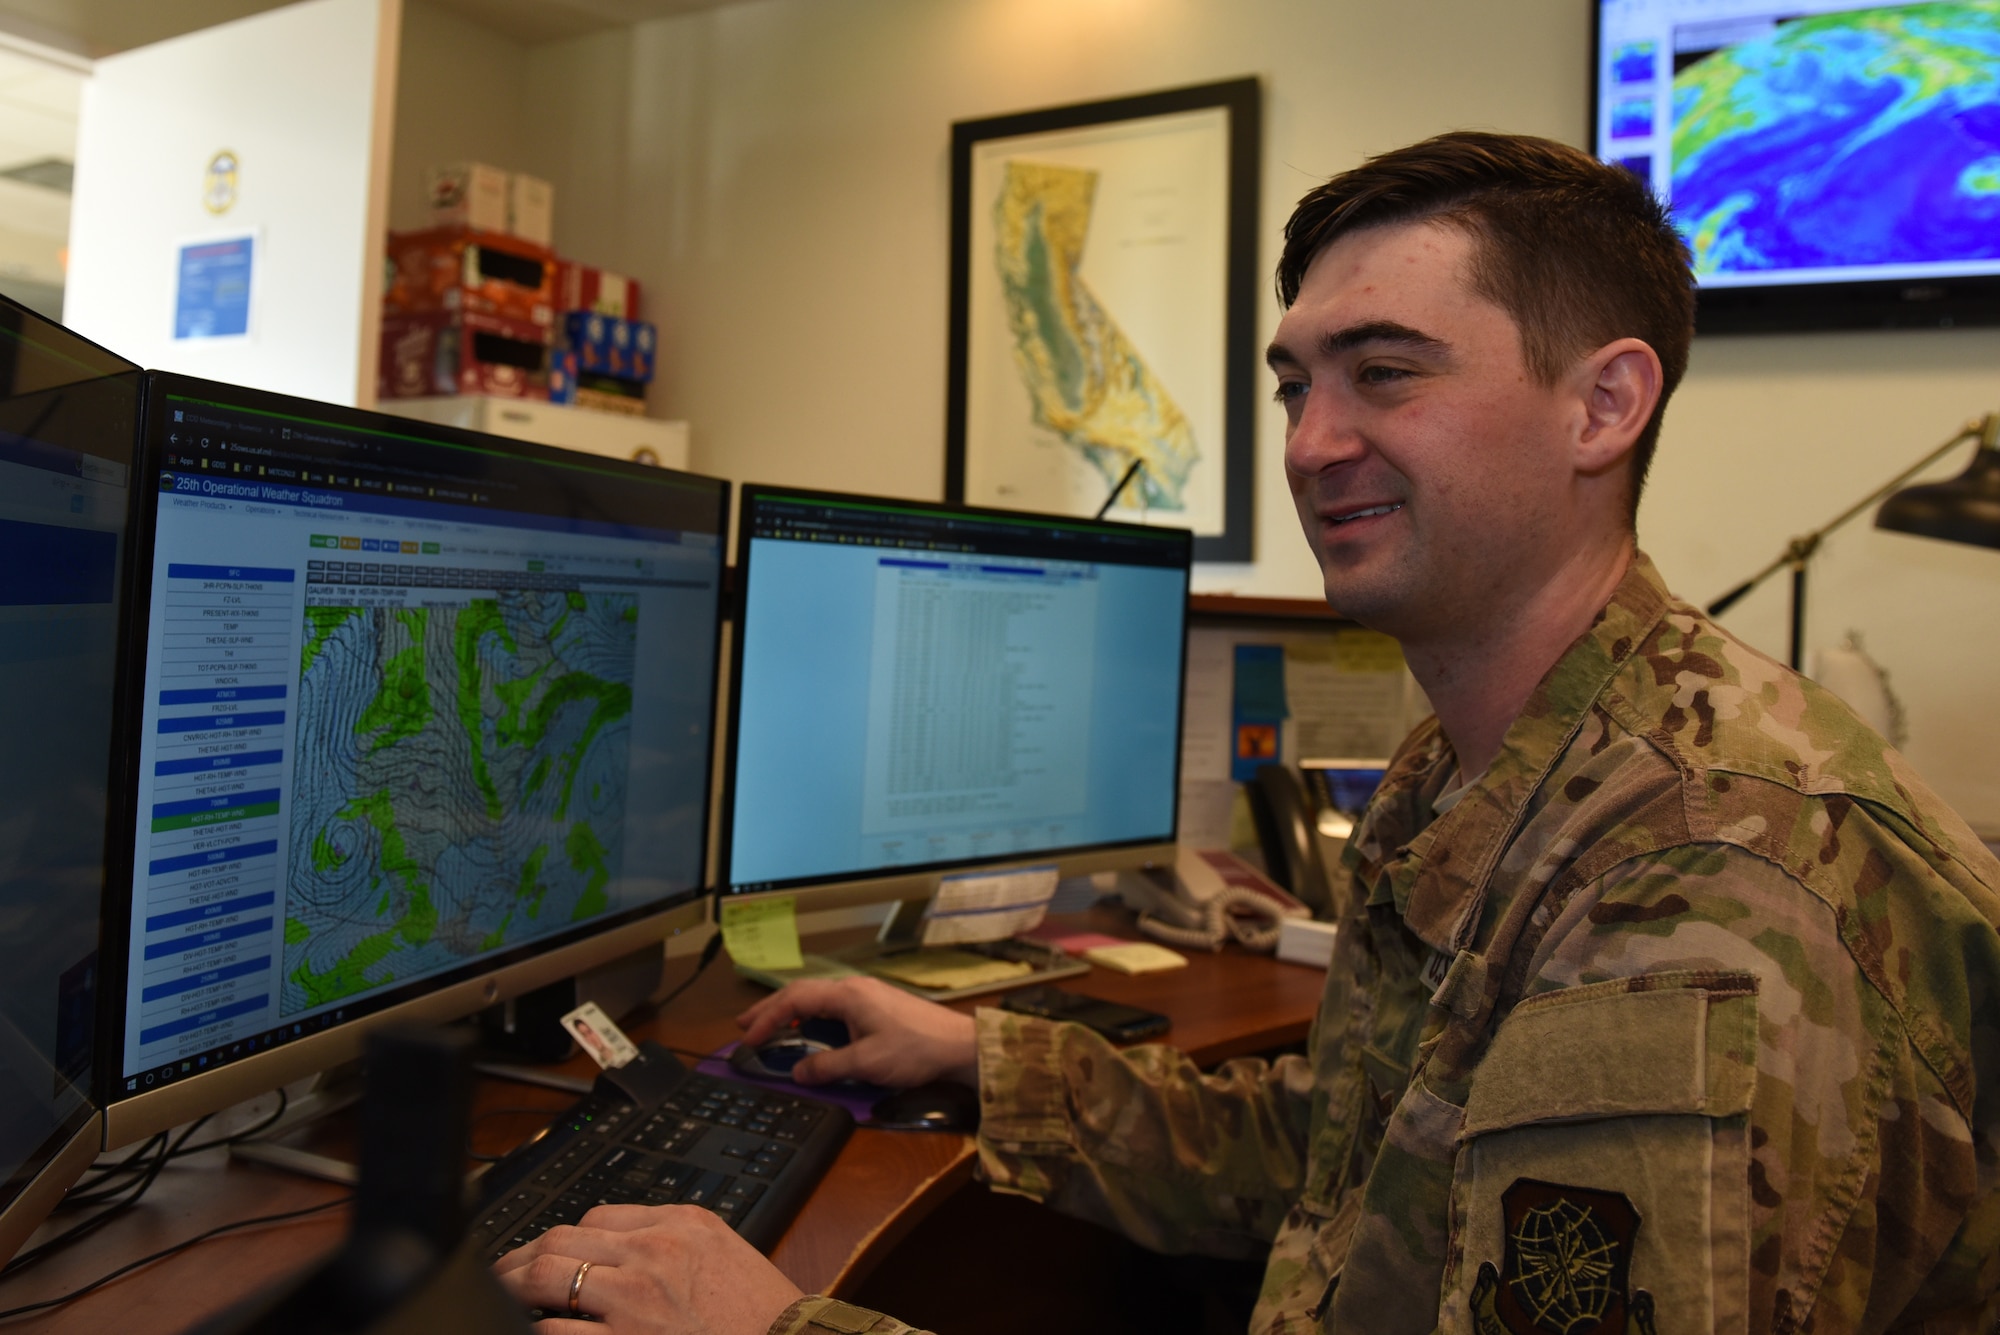 U.S. Air Force Senior Airman Dylan Marler, 60th Operation Support Squadron weather forecaster, checks the weather patterns of California Nov. 18, 2019, at Travis Air Force Base California. Marler is tasked with keeping track of the weather that will effect Travis AFB and its flying mission.  (U.S. Air Force photo by Airman 1st Class Cameron Otte)